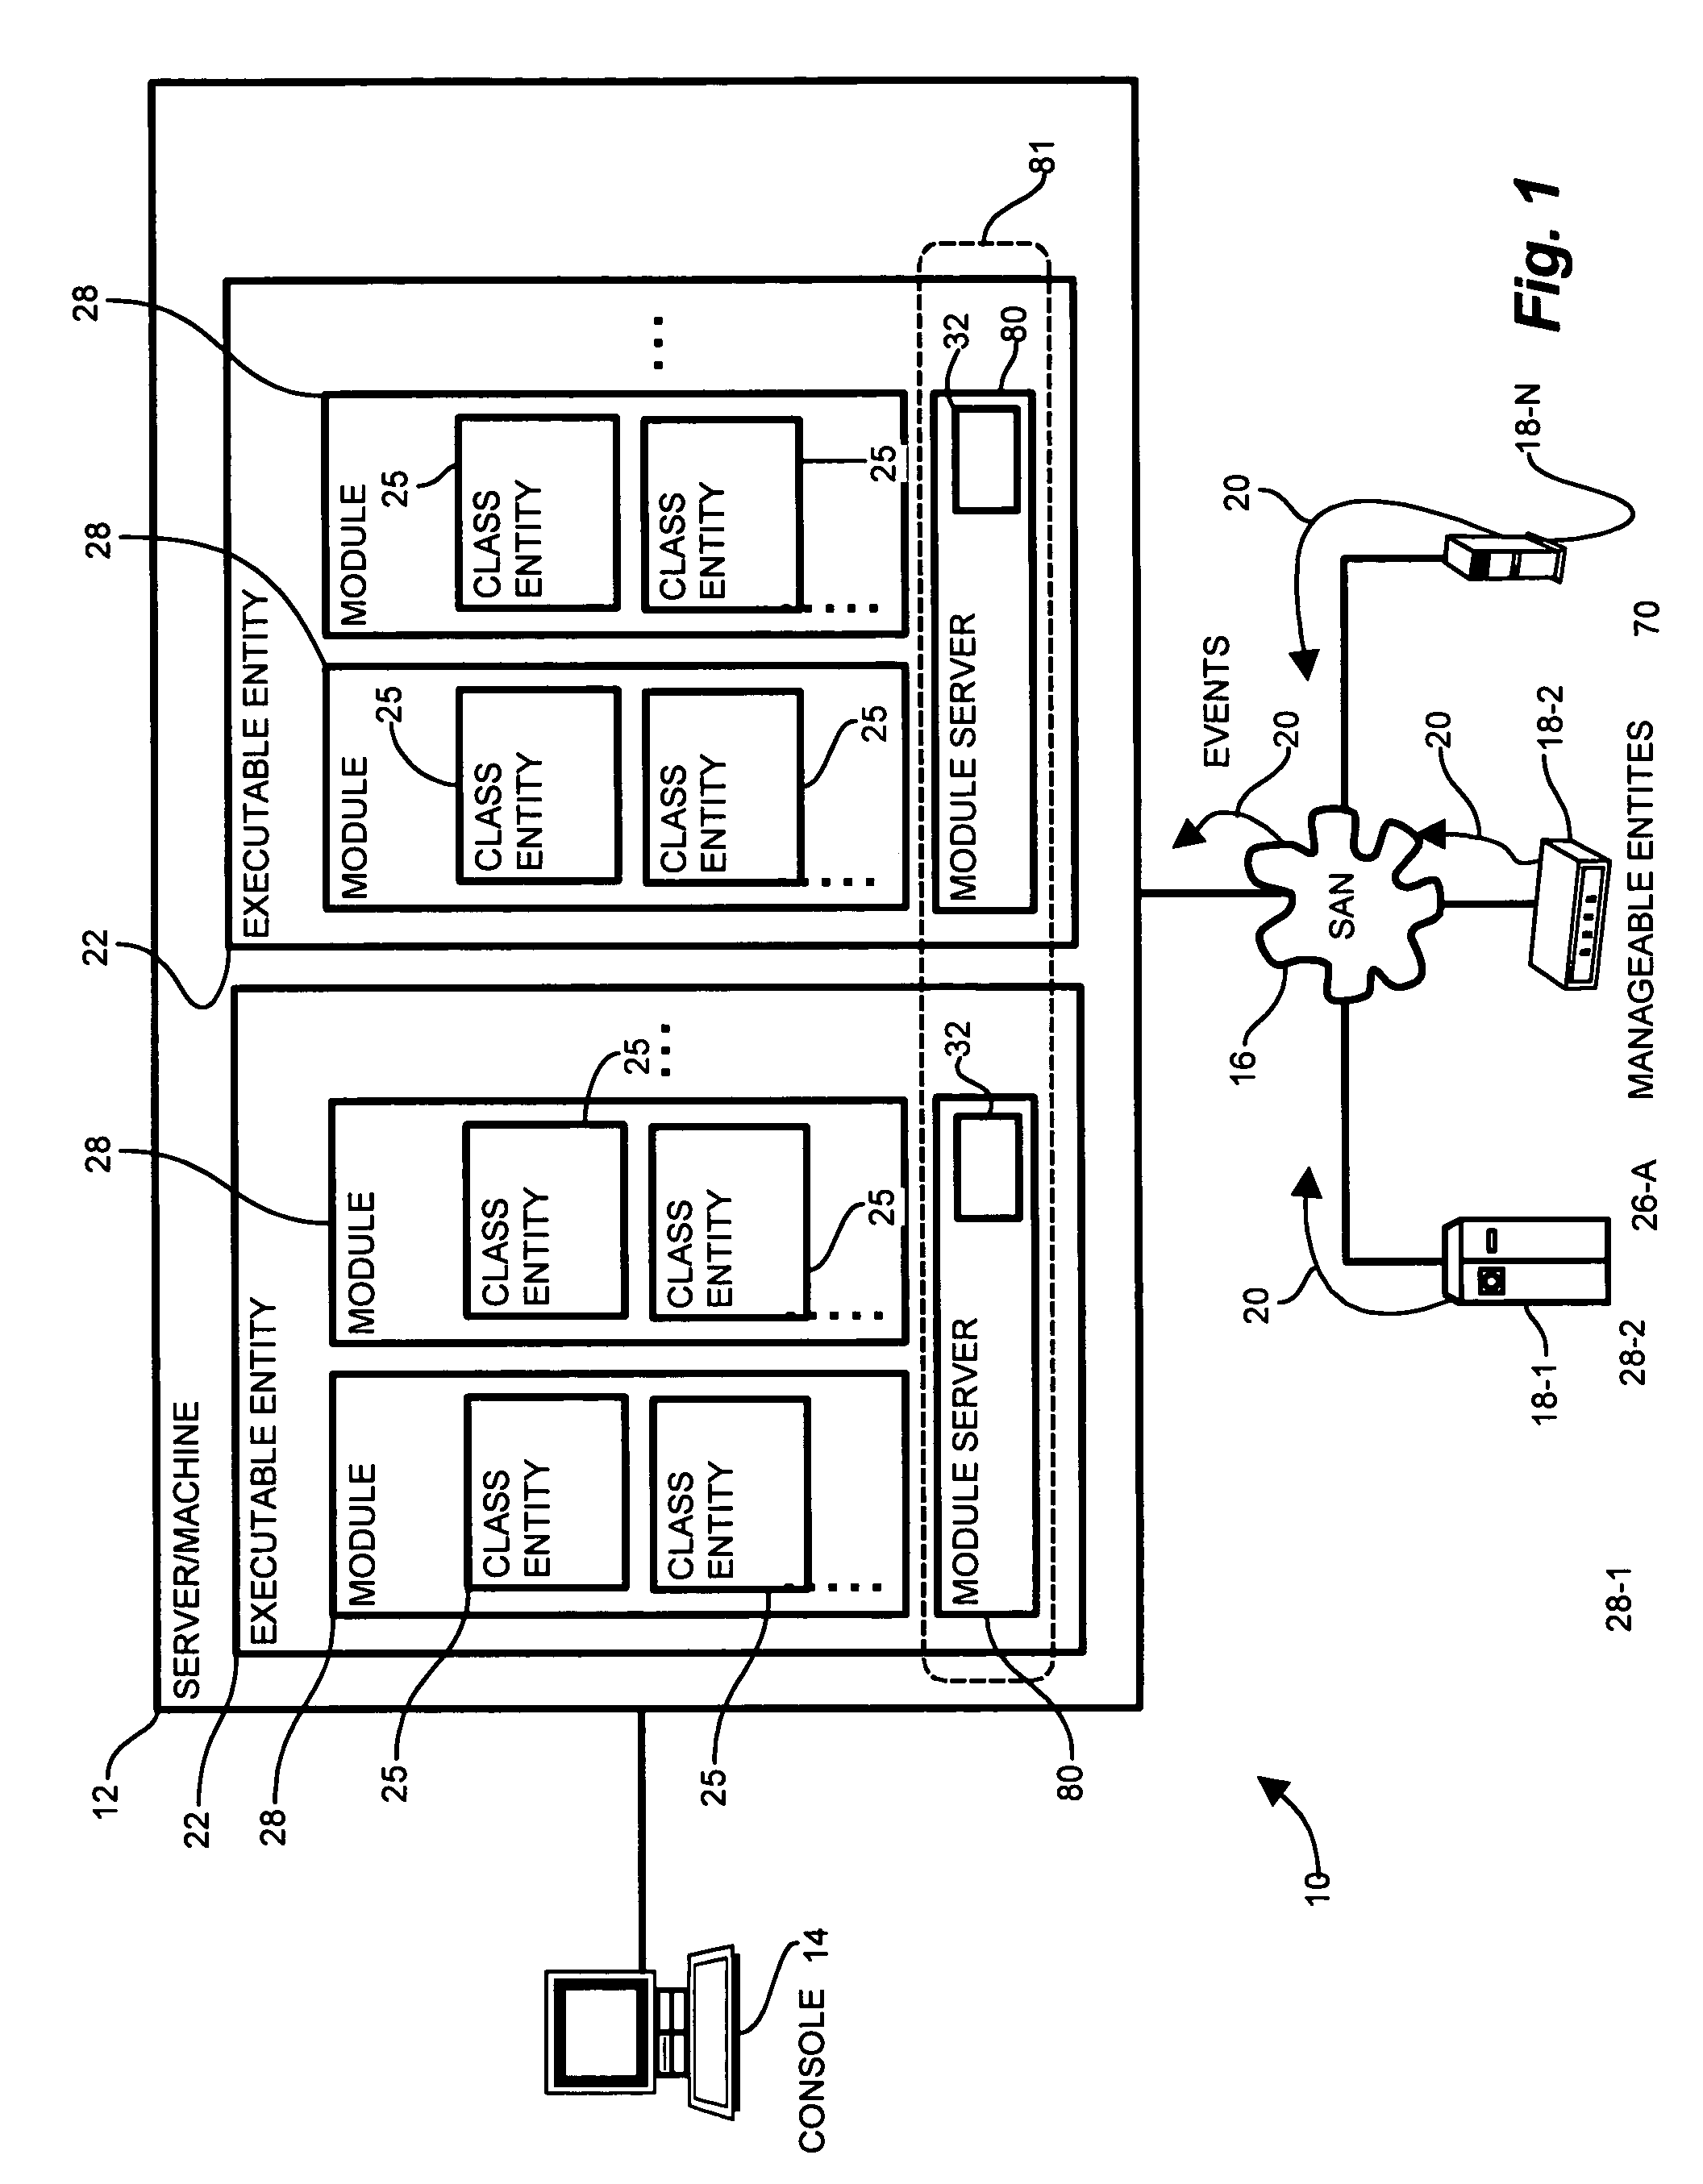 Methods and apparatus providing an event service infrastructure